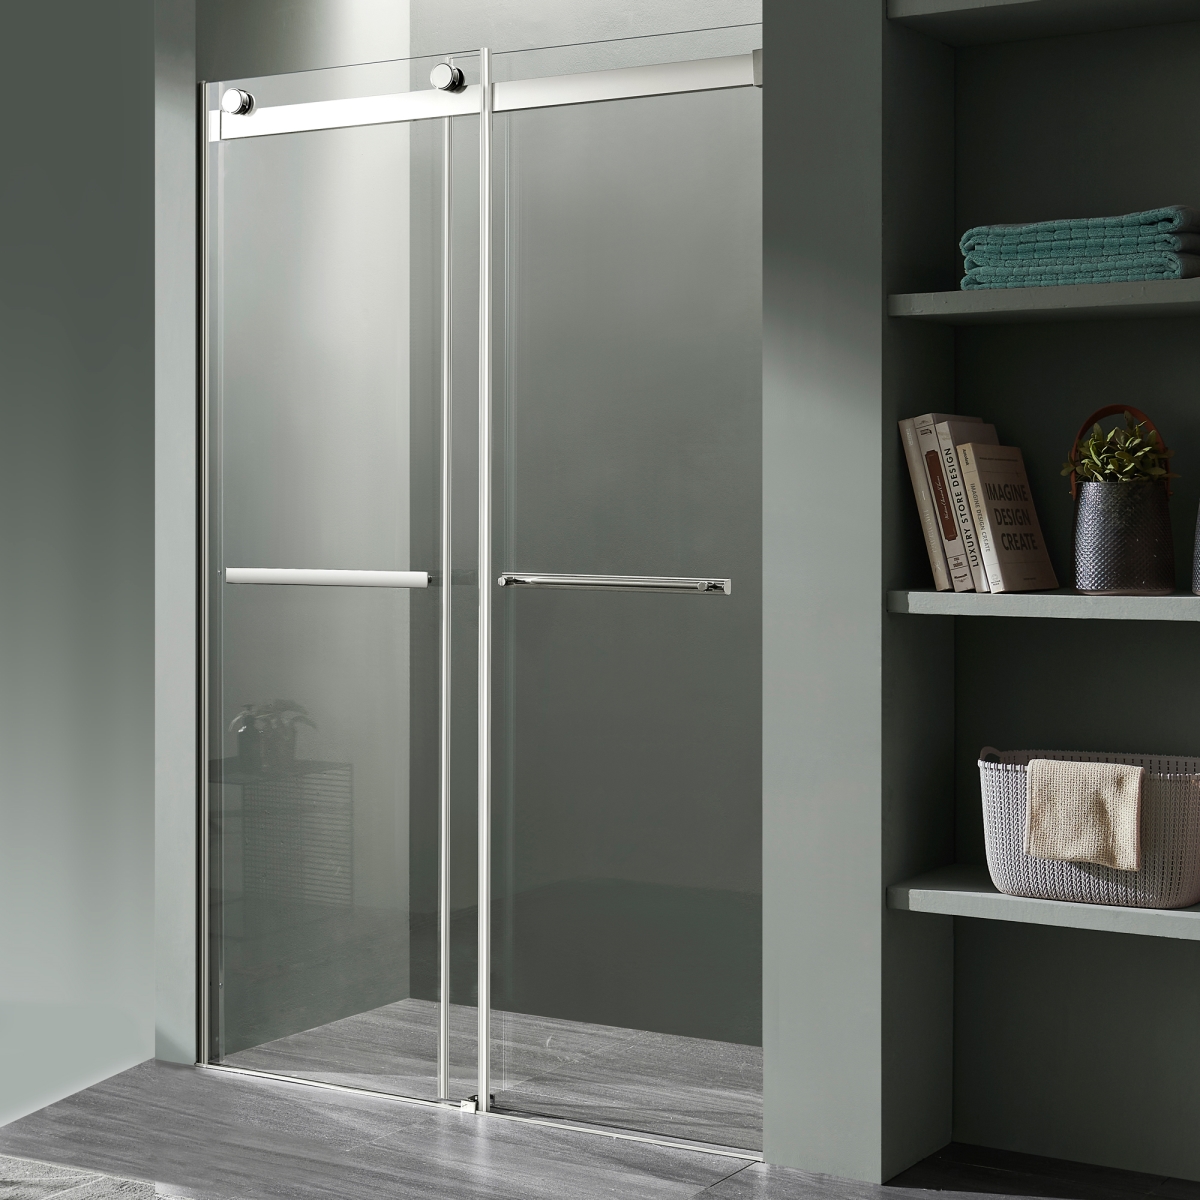 Picture of Anzzi SD-FRLS05802CH 60 x 76 in. Kahn Series Frameless Sliding Shower Door with Horizontal Handle, Chrome